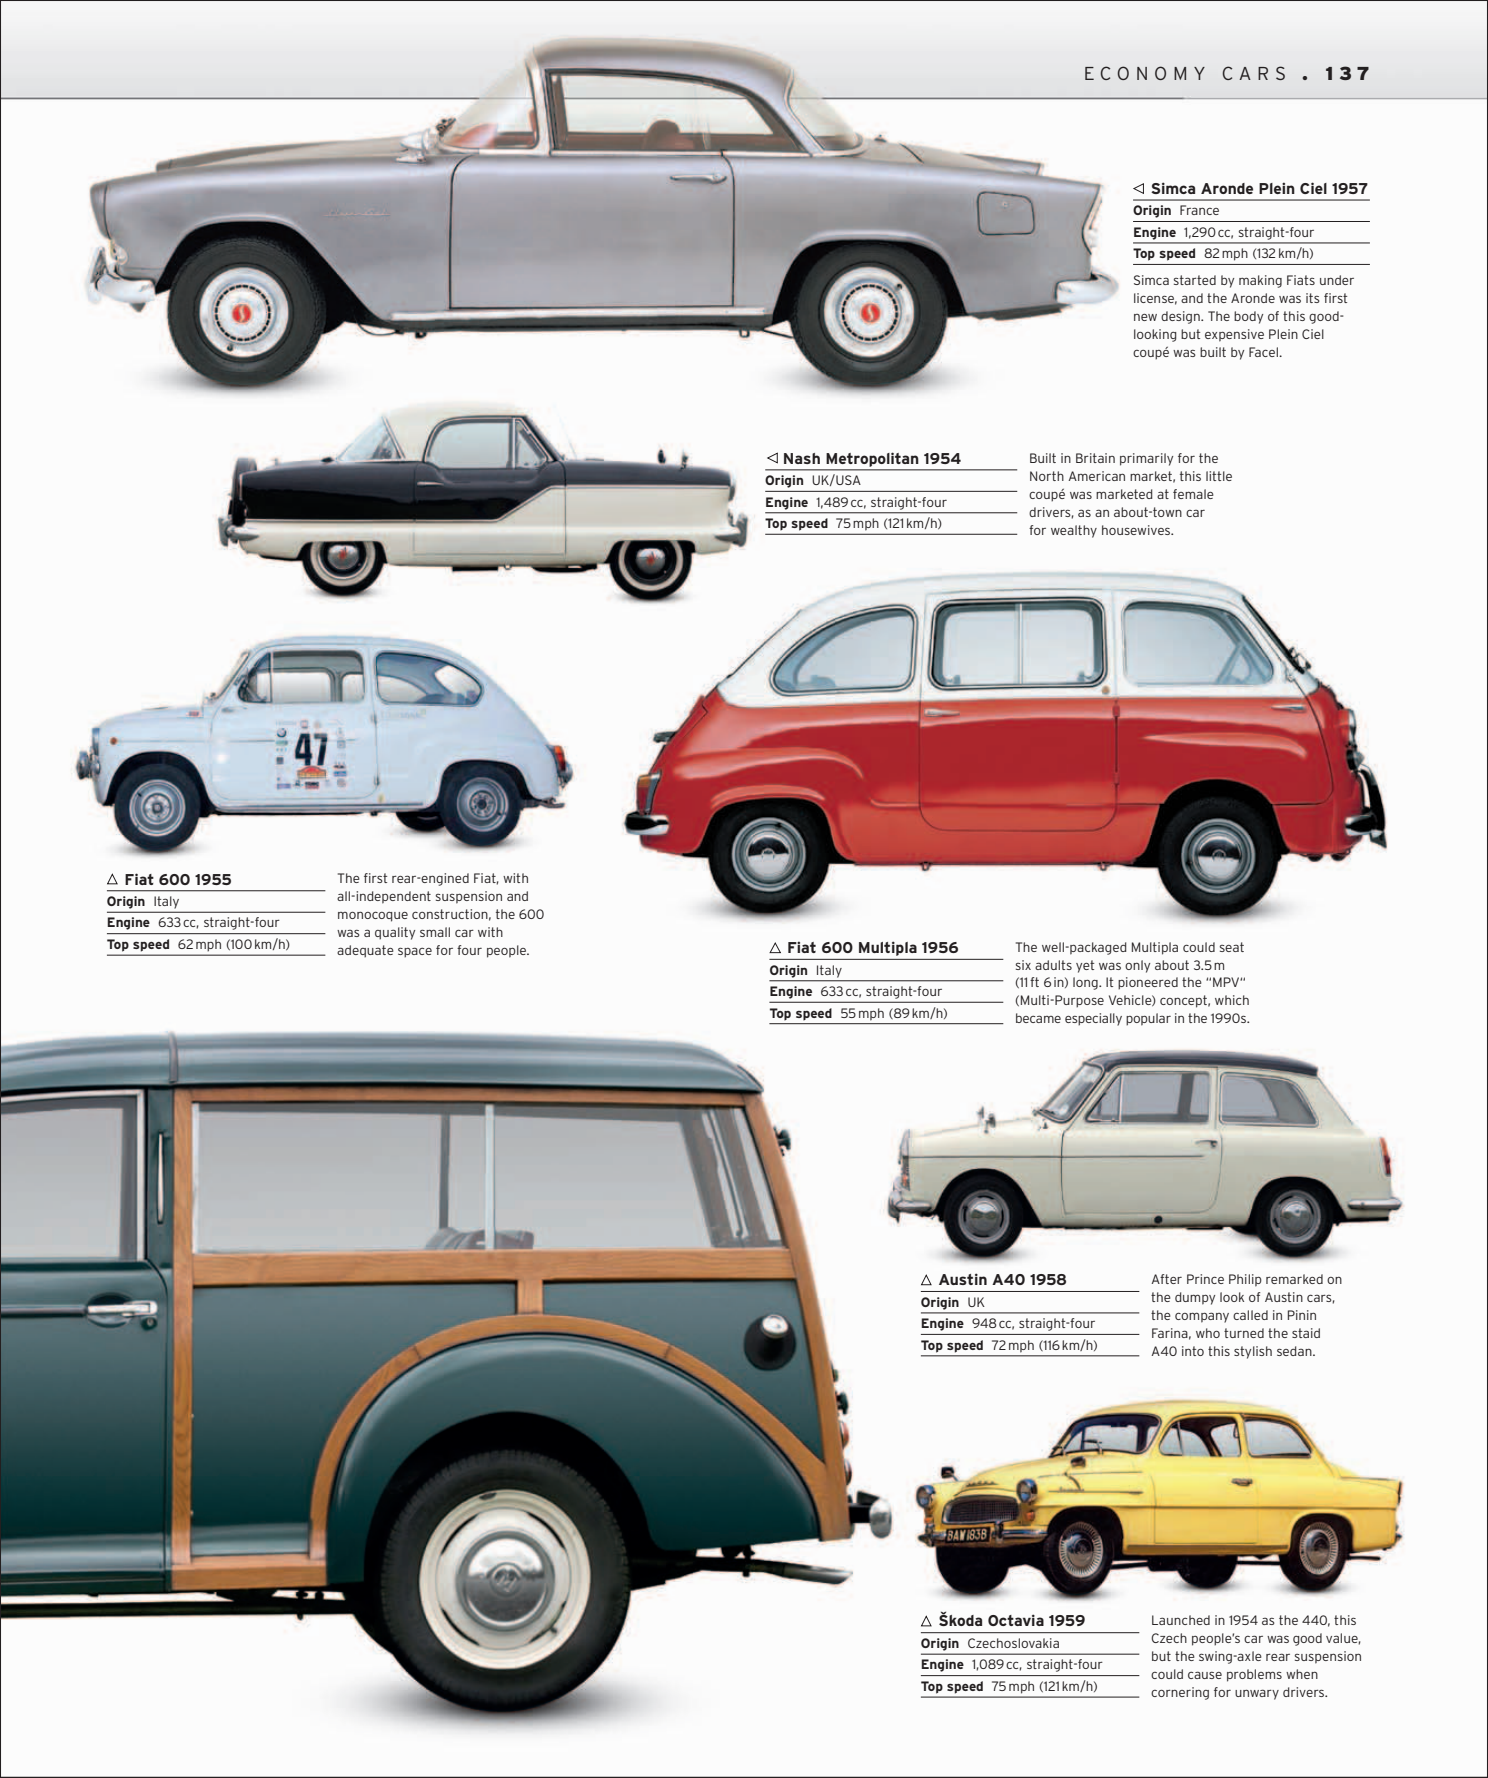 Car%20-%20The%20Definitive%20Visual%20History%20of%20the%20Automobile_139.png